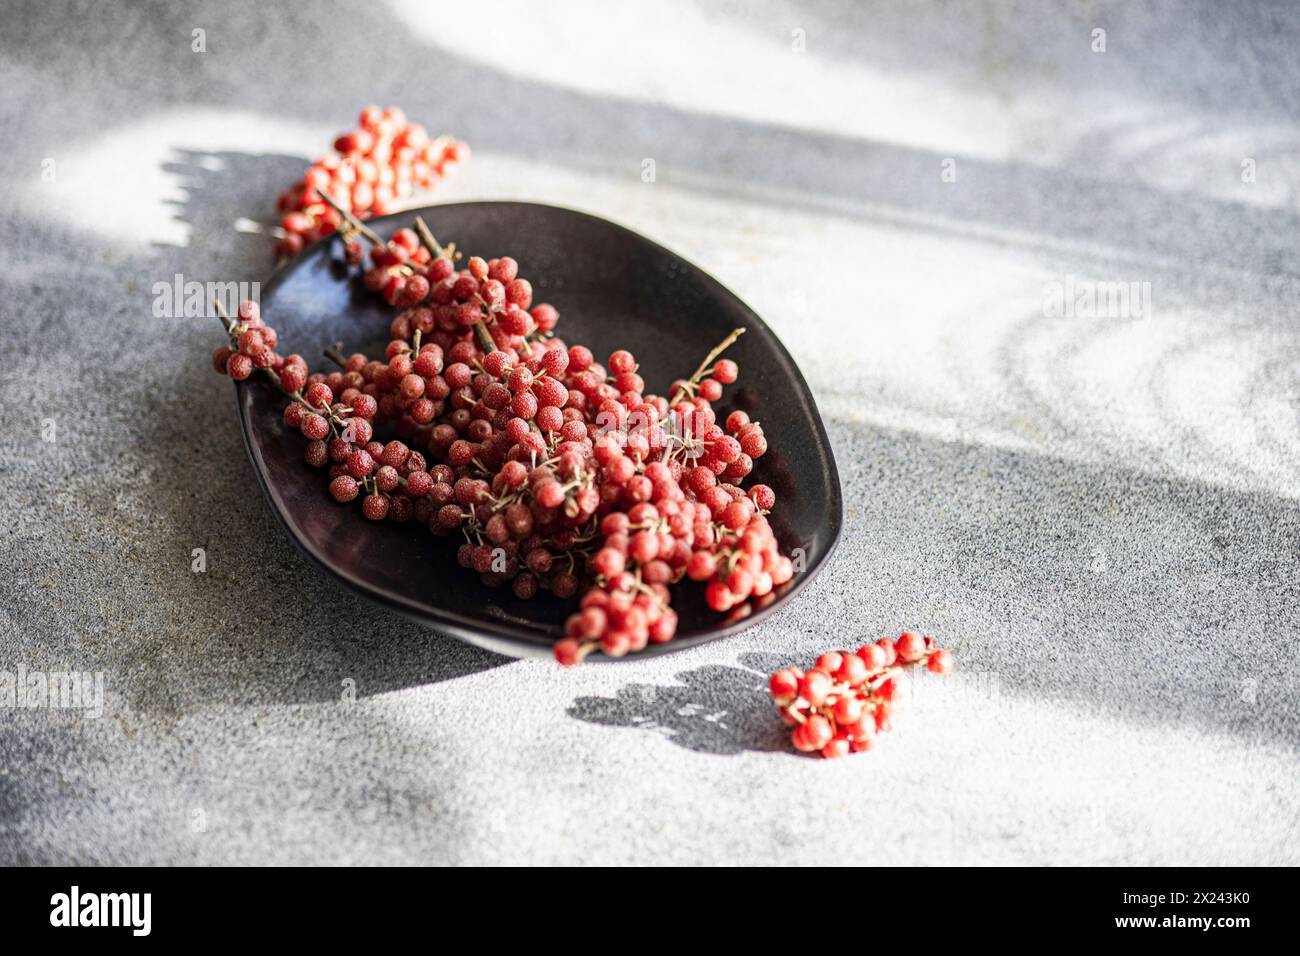 Buffalo berries in a black bowl Stock Photo